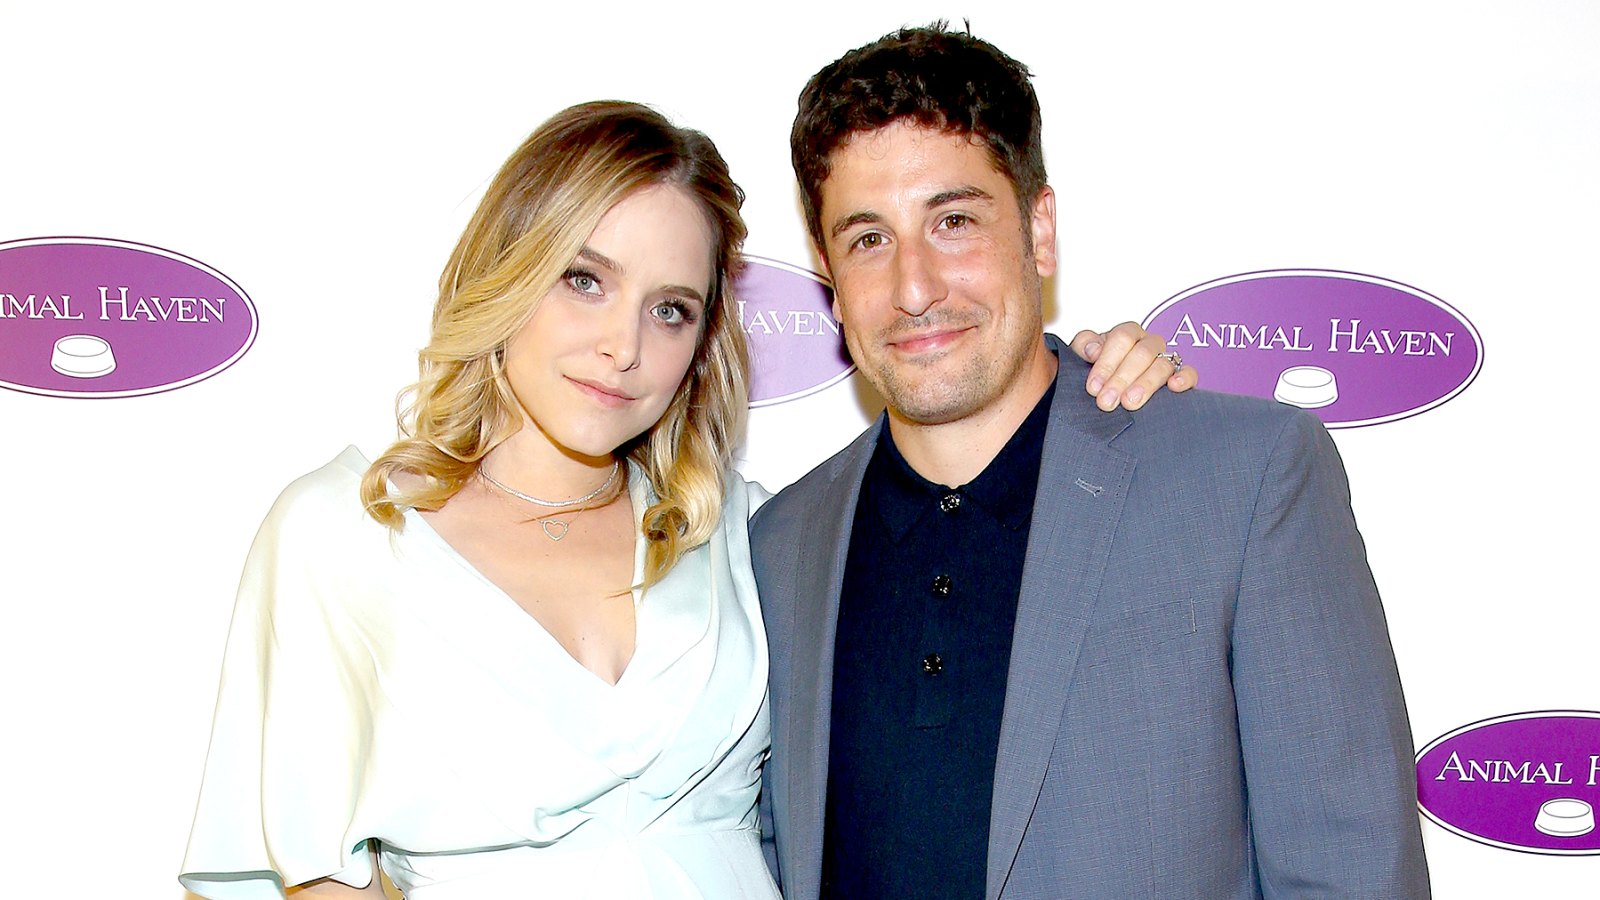 Jenny Mollen (L) and Jason Biggs attend the Animal Haven's 50th Anniversary Party at Capitale on June 14, 2017 in New York City.